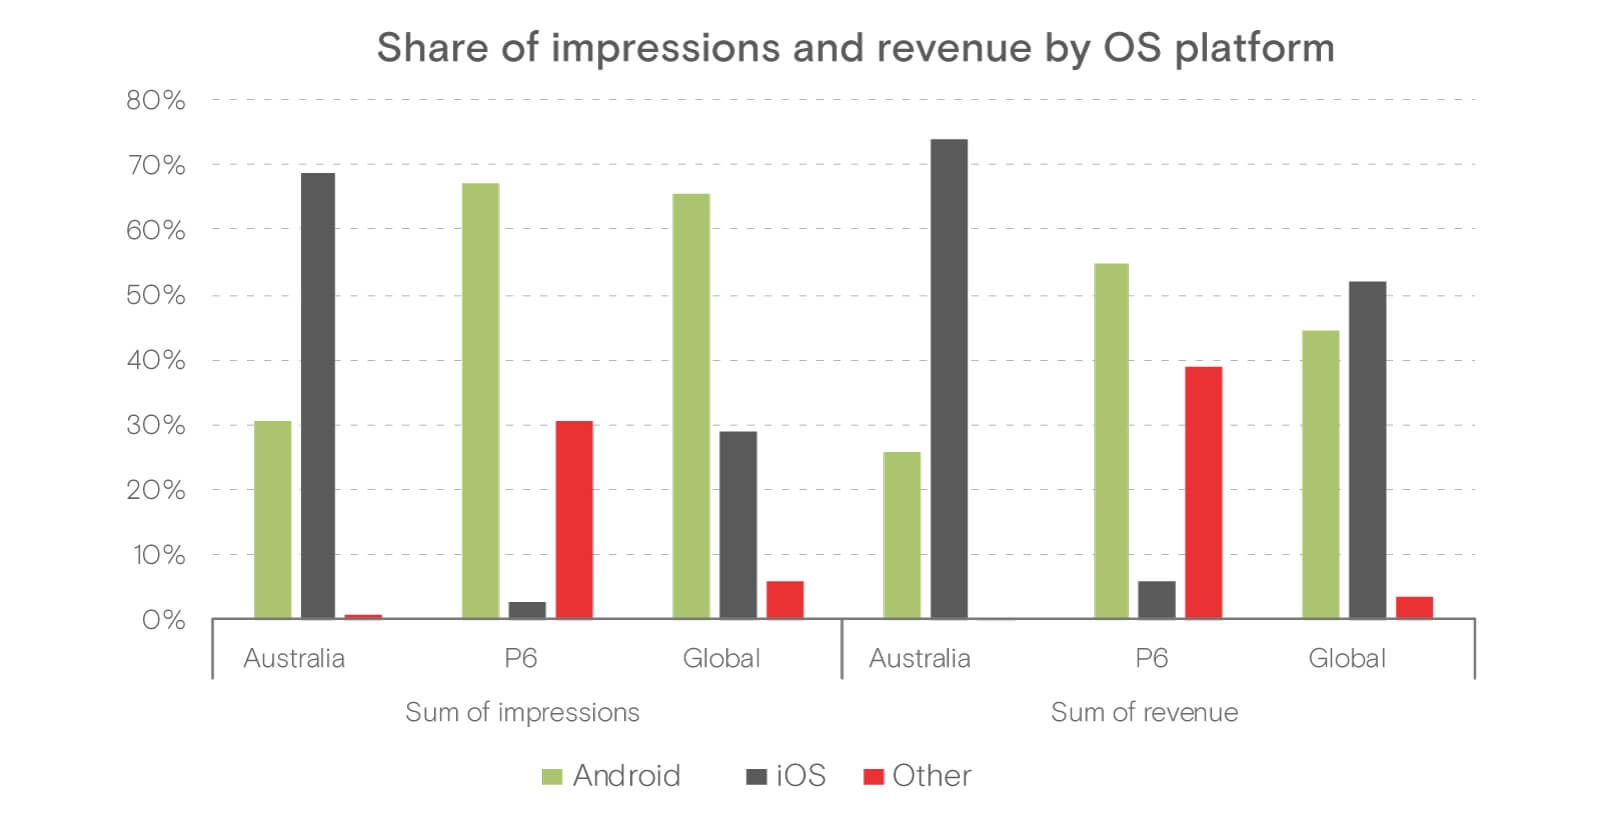 Opera Mediaworks Share of Impressions and Revenue by OS Platform Android iOS Other APAC Australia Global